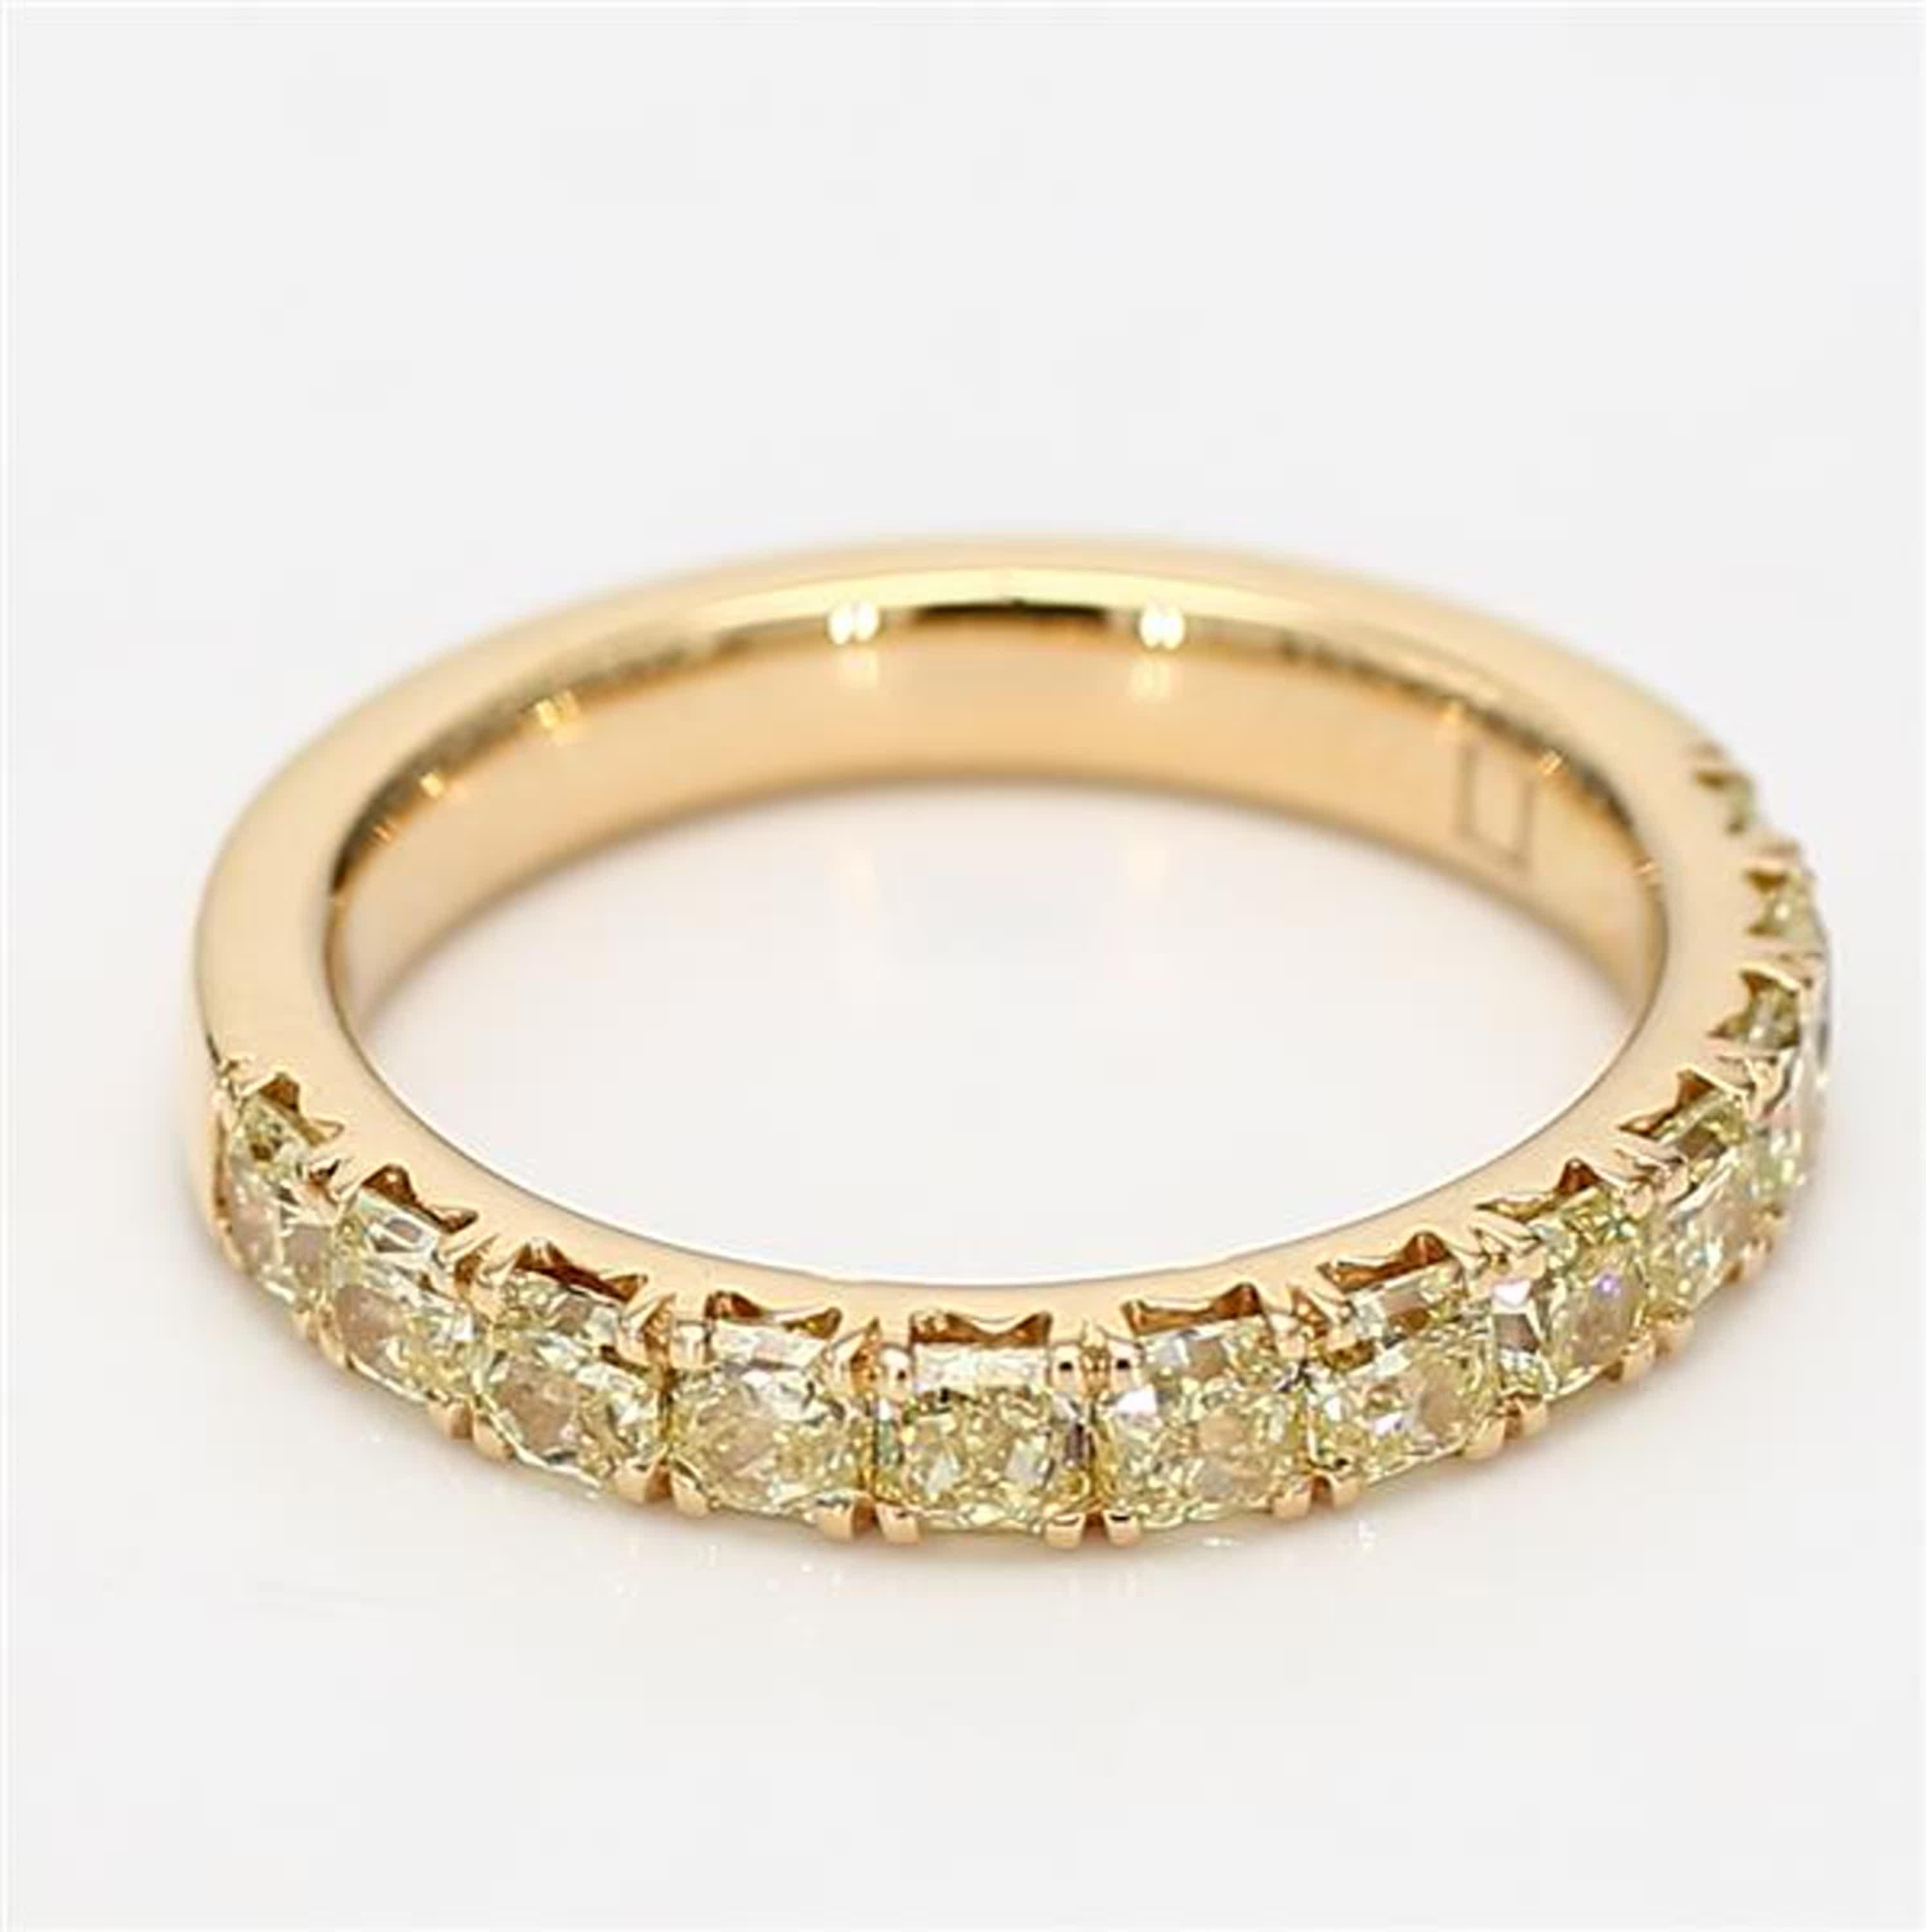 RareGemWorld's classic diamond band. Mounted in a beautiful 18K Yellow Gold setting with natural radiant yellow diamond's. This band is guaranteed to impress and enhance your personal collection!

Total Weight: 1.39cts

Natural Radiant Yellow